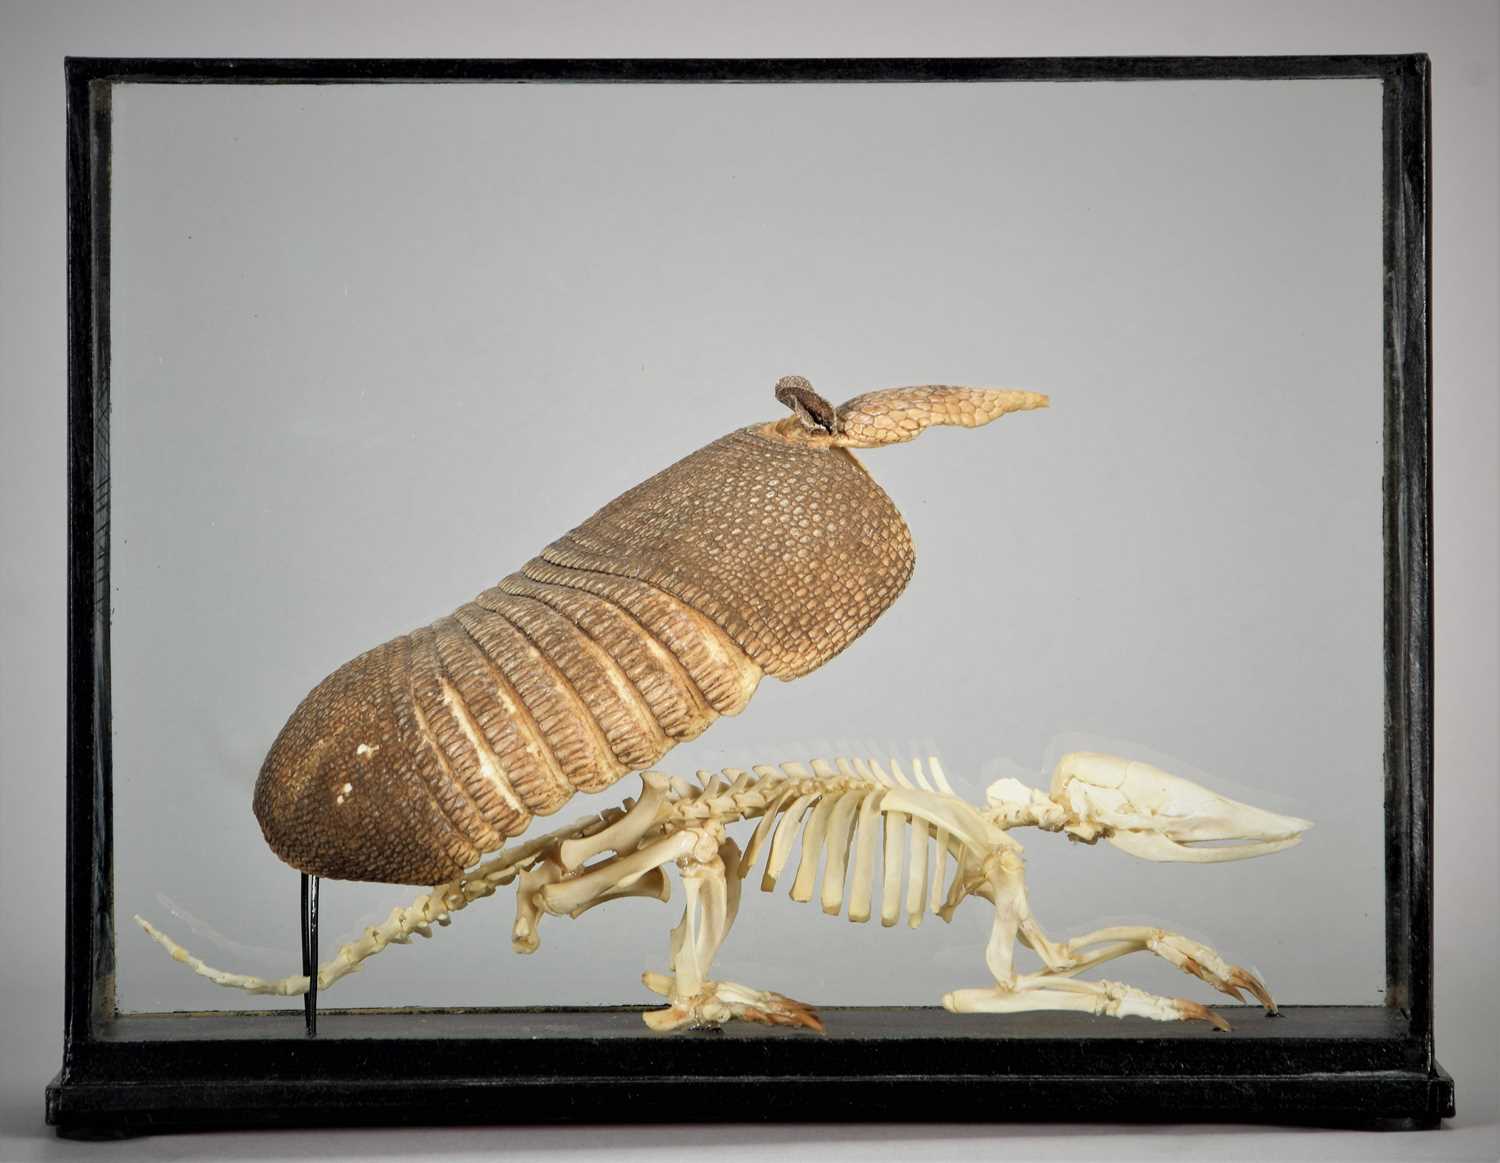 Skeletons/Anatomy: A Cased Banded Armadillo Skeleton and Carapace, modern, a complete articulated - Image 2 of 2